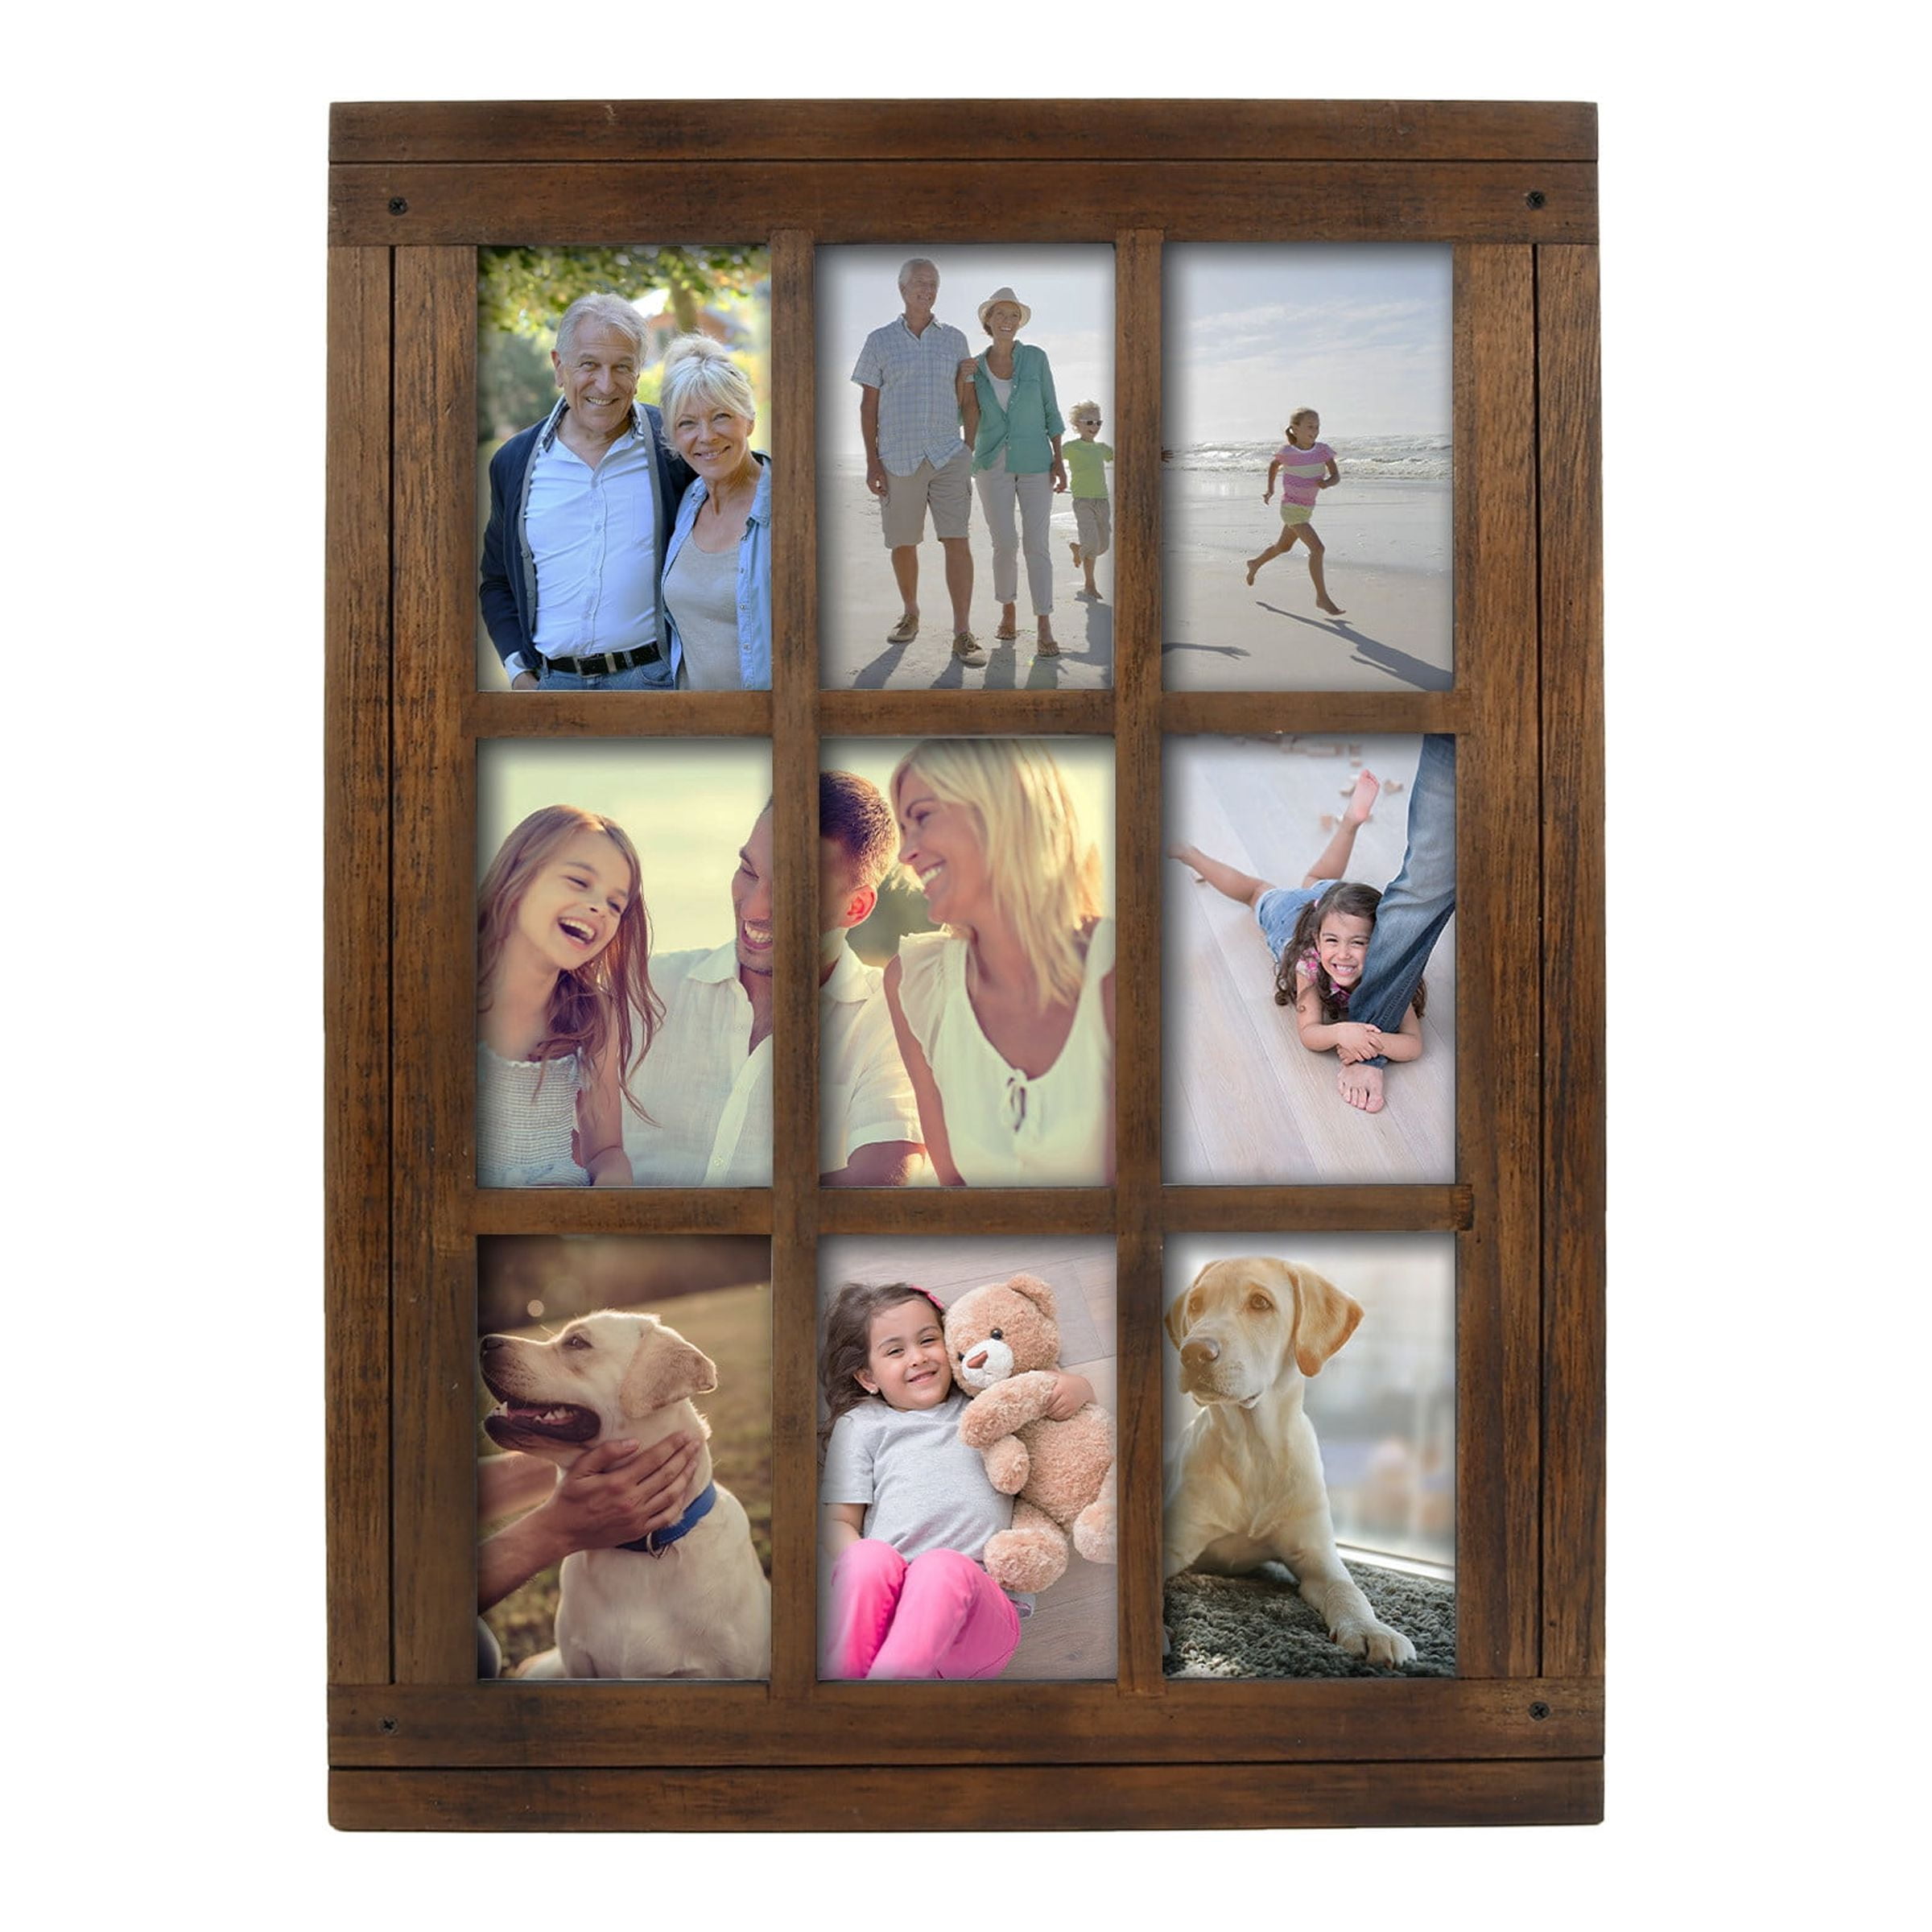 Lavezee 4x6 Collage Triple Picture Frames Set, Walnut Brown 6 Opening  Hanging Vertical Frame Made to Display 4 by 6 Inch Photo Print for Wall  Decor